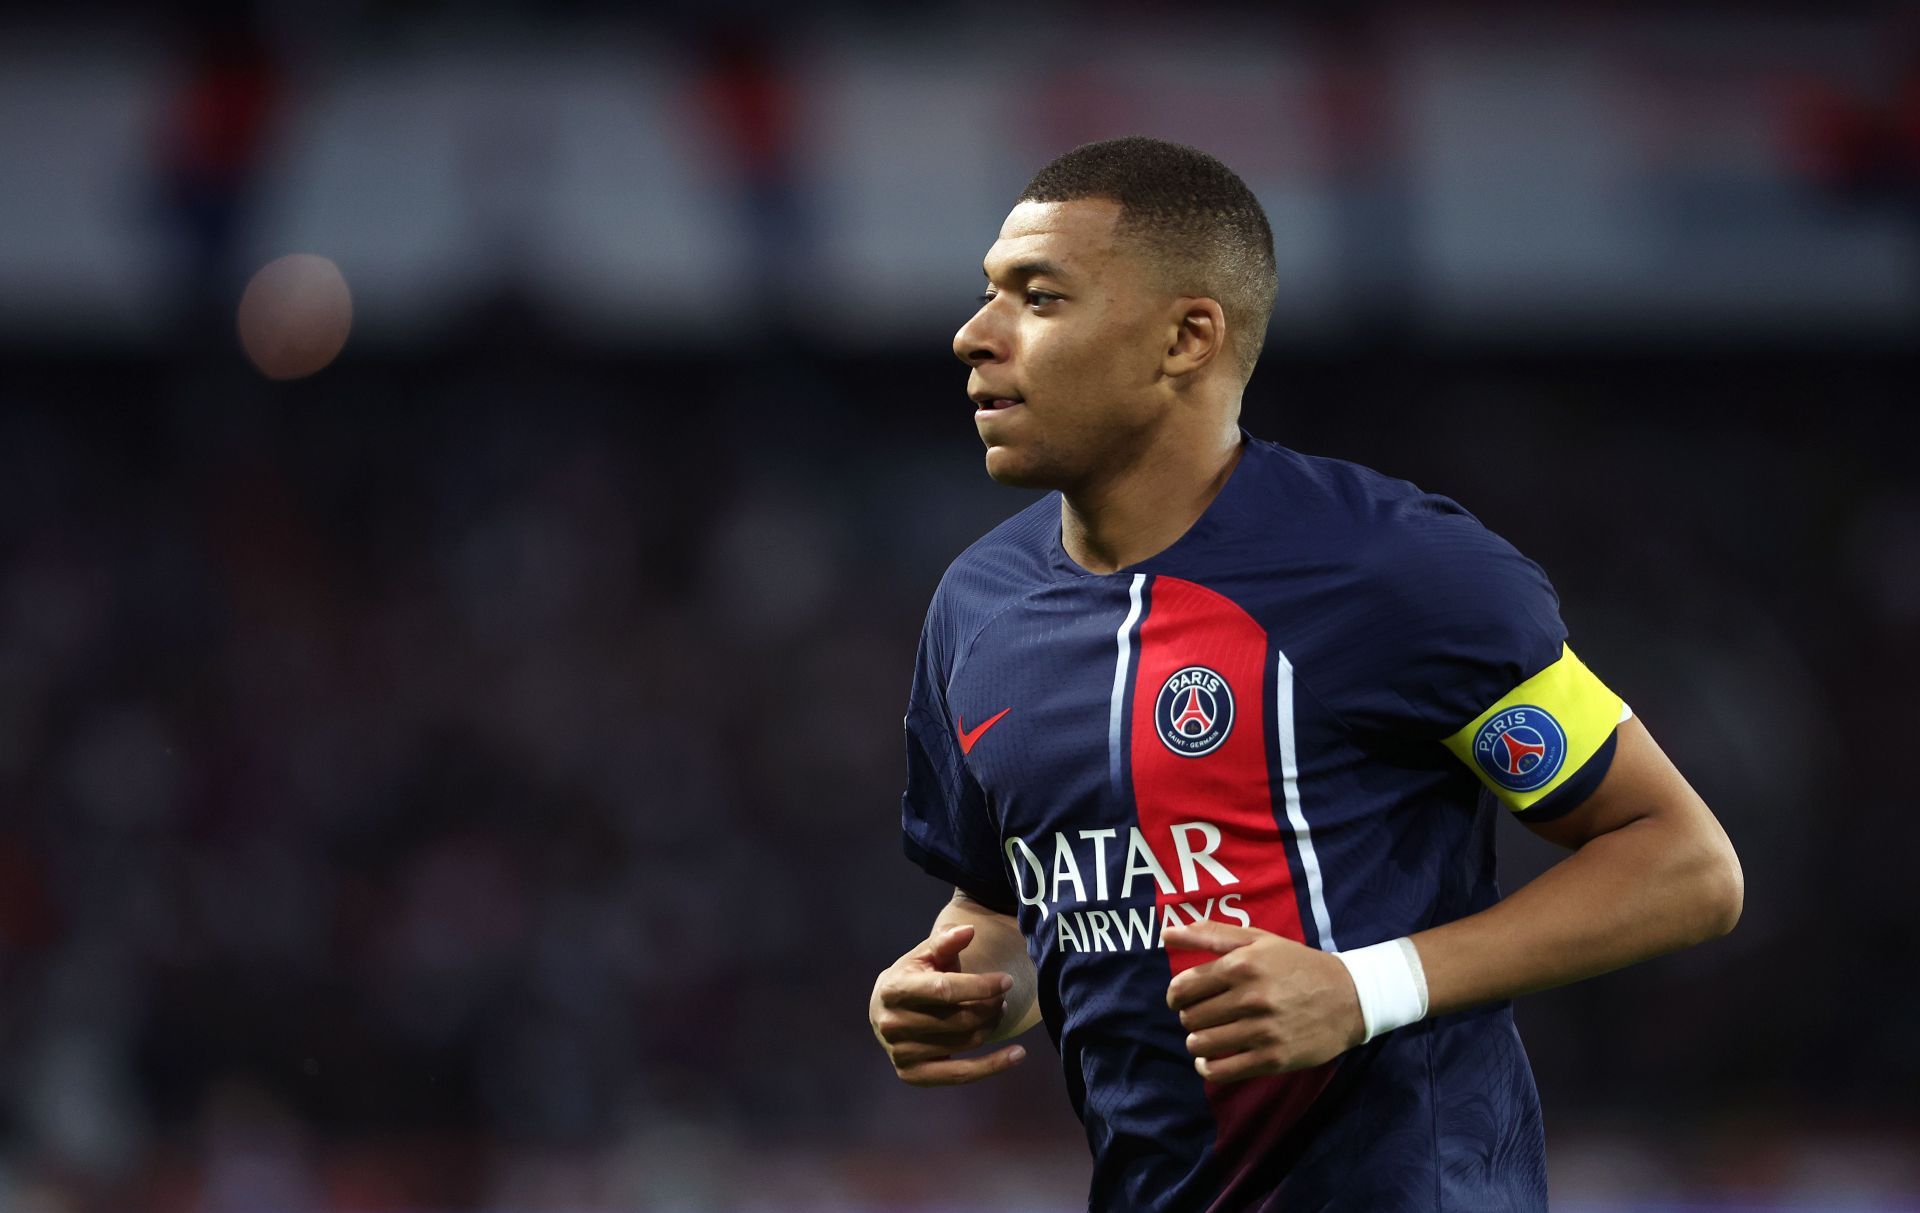 Kylian Mbappe has been cast out of the PSG team during pre-season.